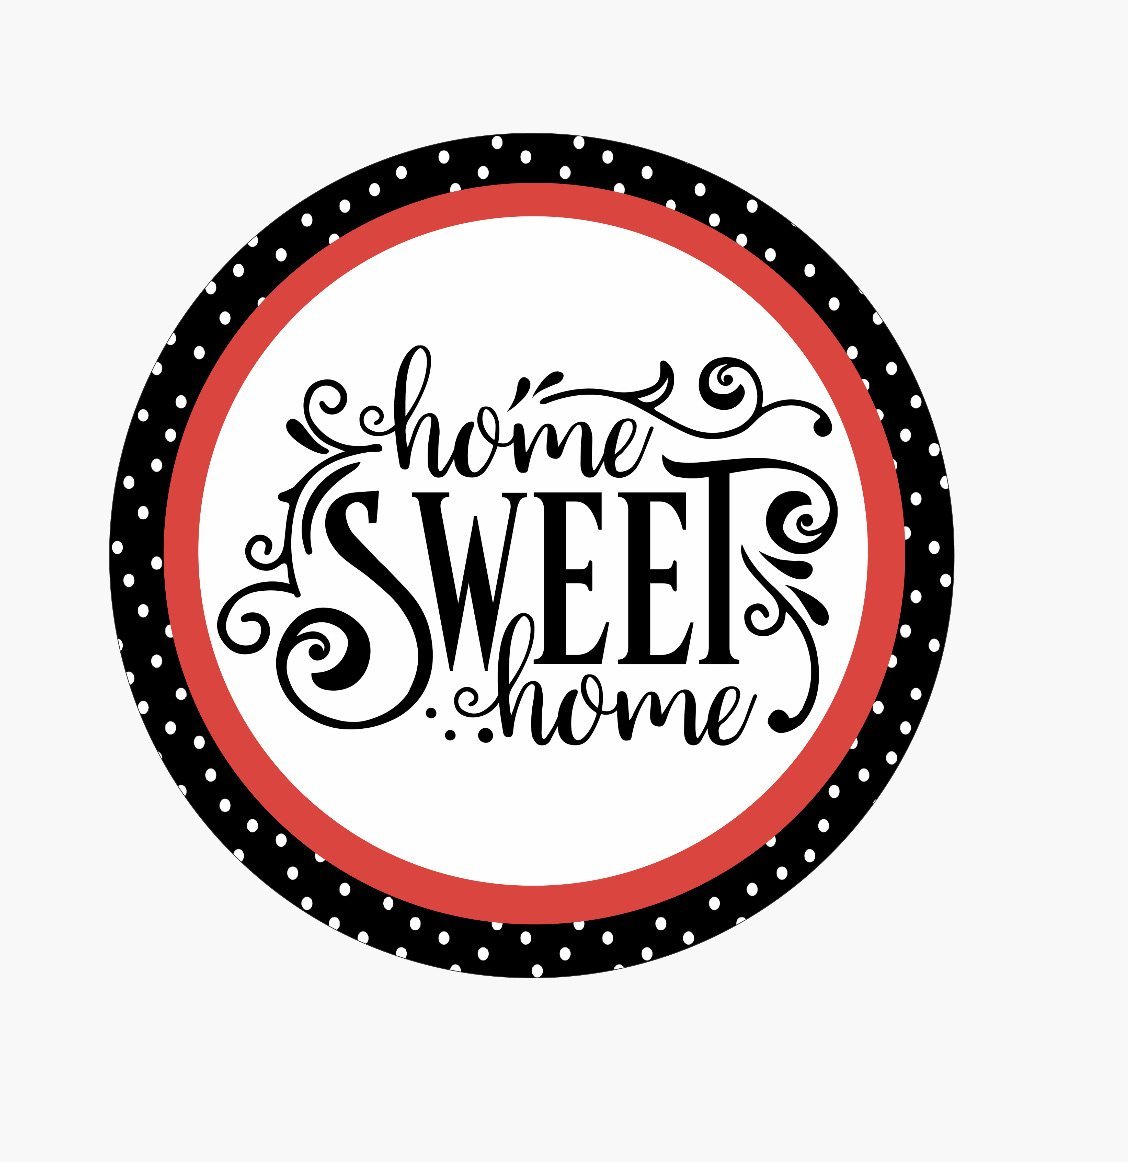 Polka dots Metal home sweet home round sign 10” - Greenery Market signs for wreaths